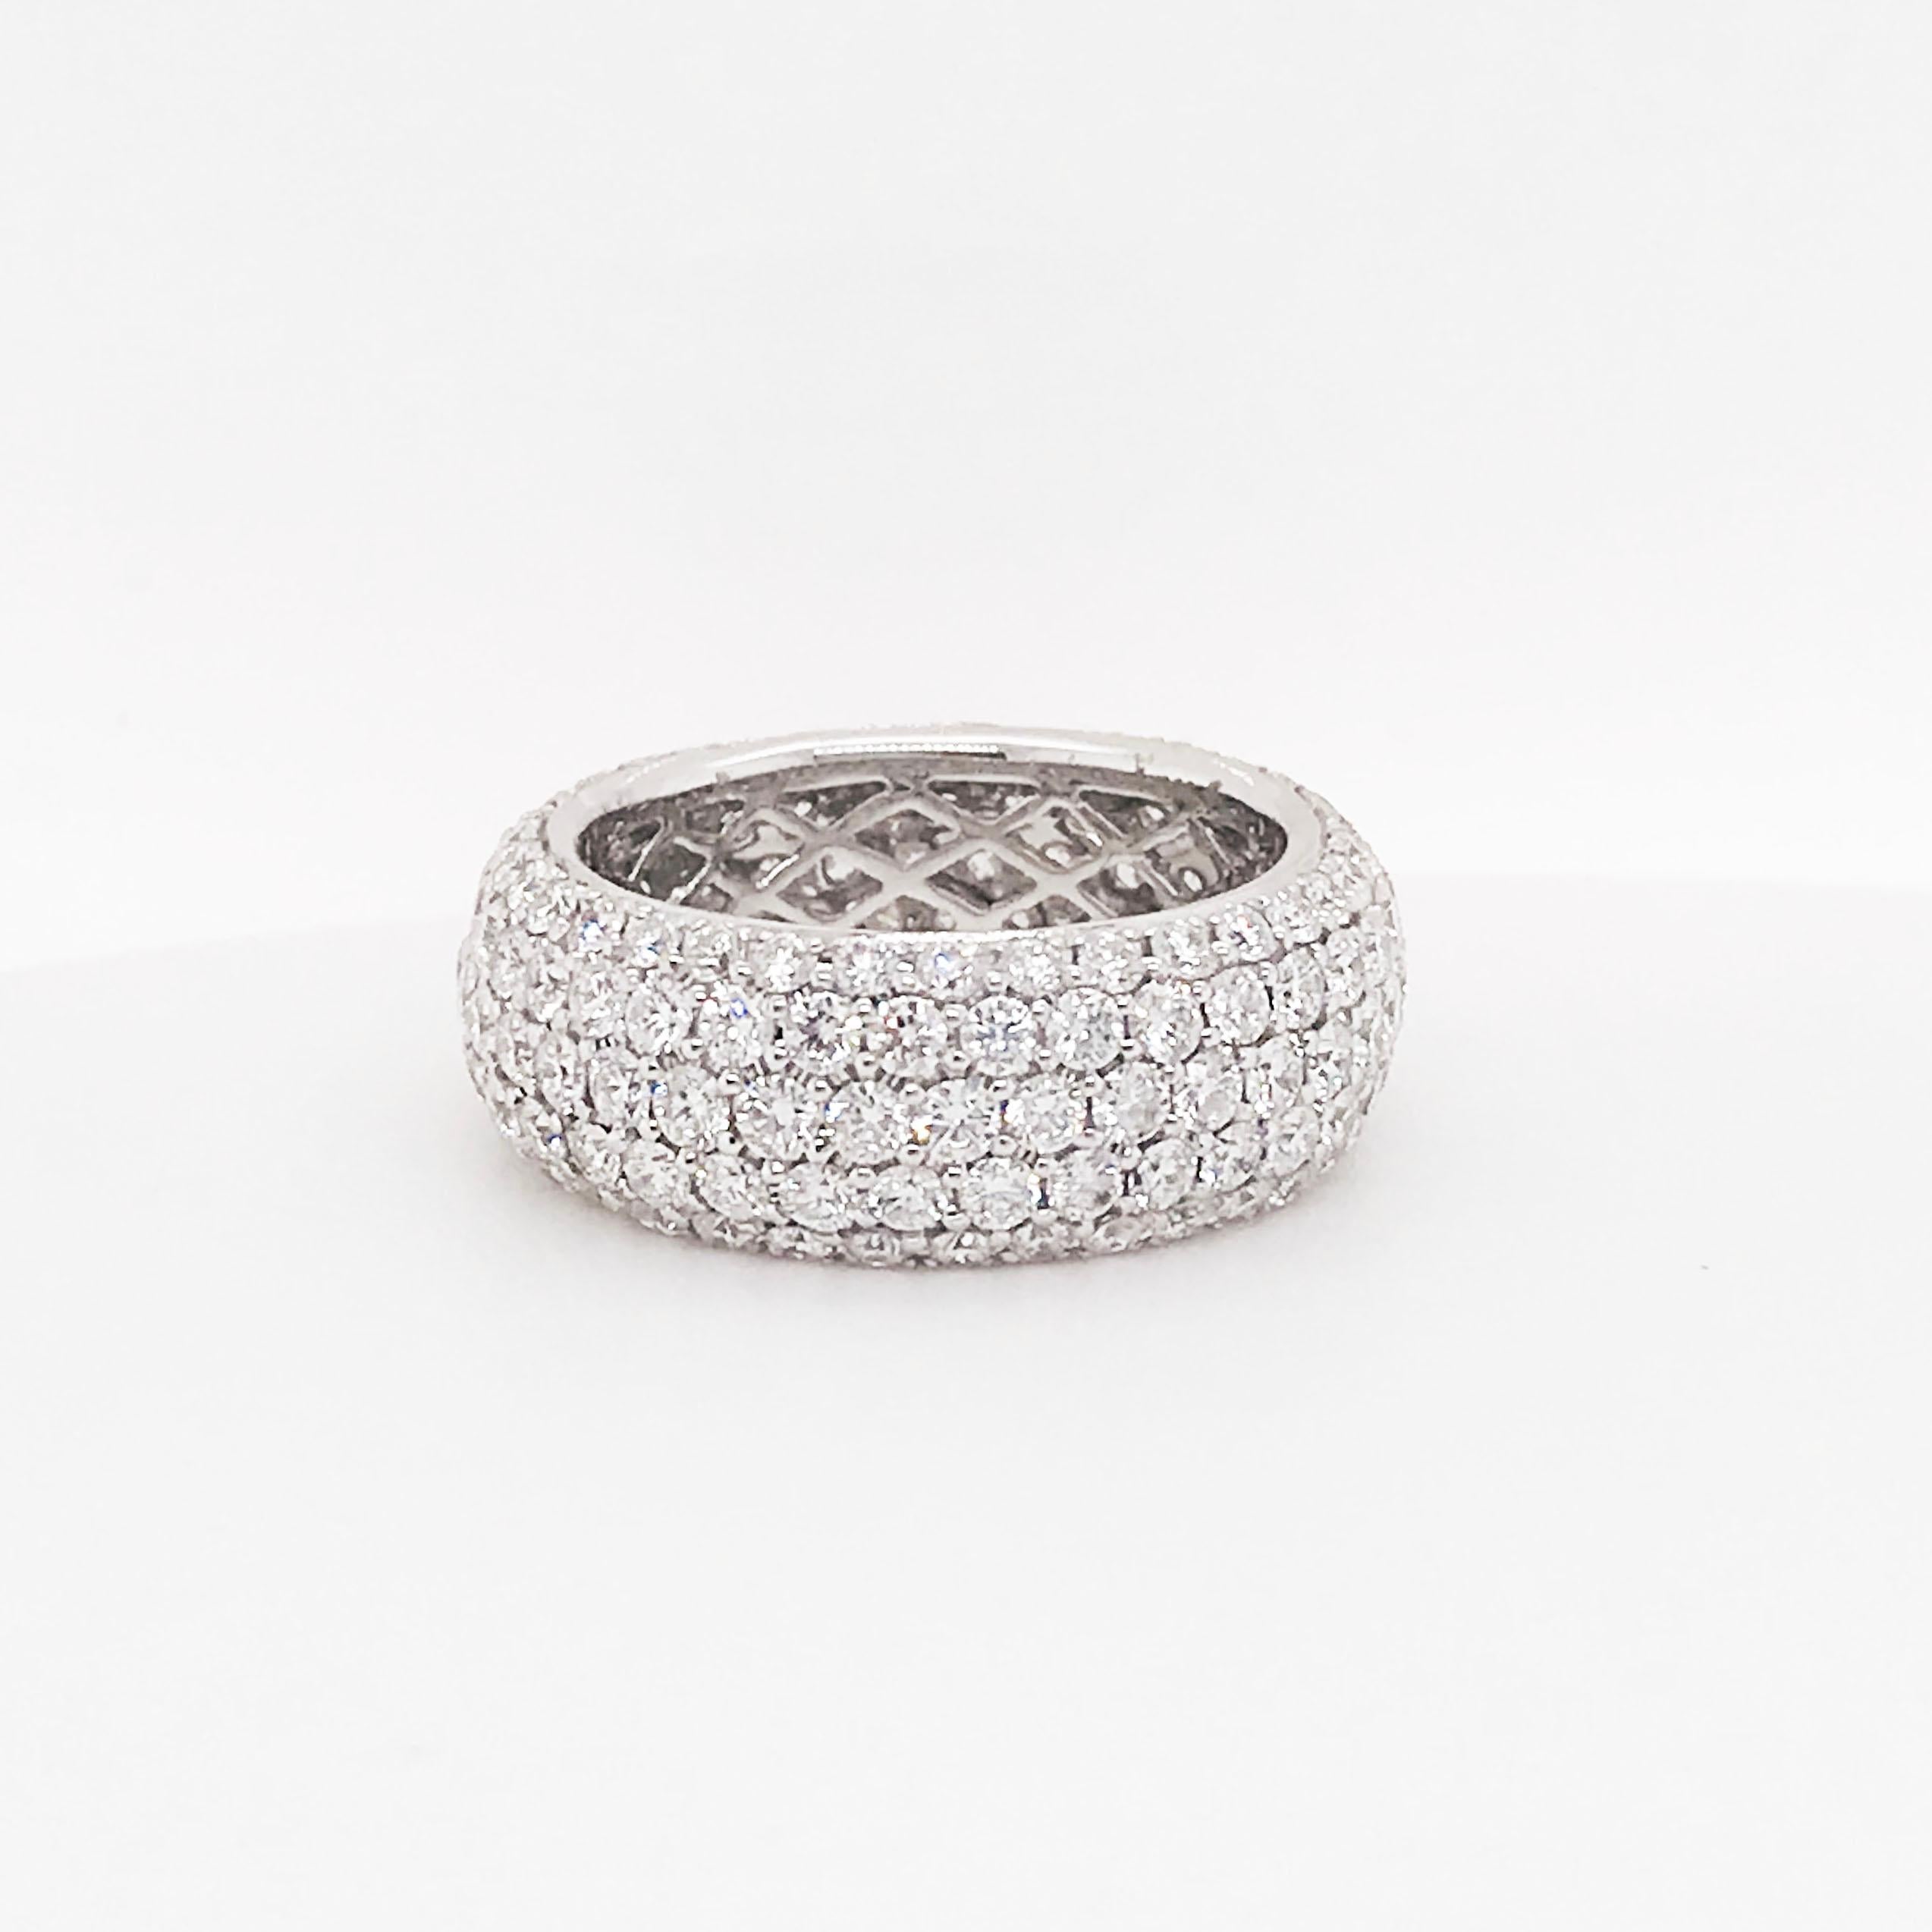 Gorgeous designer diamond cigar ring! With genuine, natural round brilliant diamonds, pave set in five rows going all the way around the band! This ring has 3.76 carats total diamond weight and is 8 millimeters wide! The round brilliant diamonds are